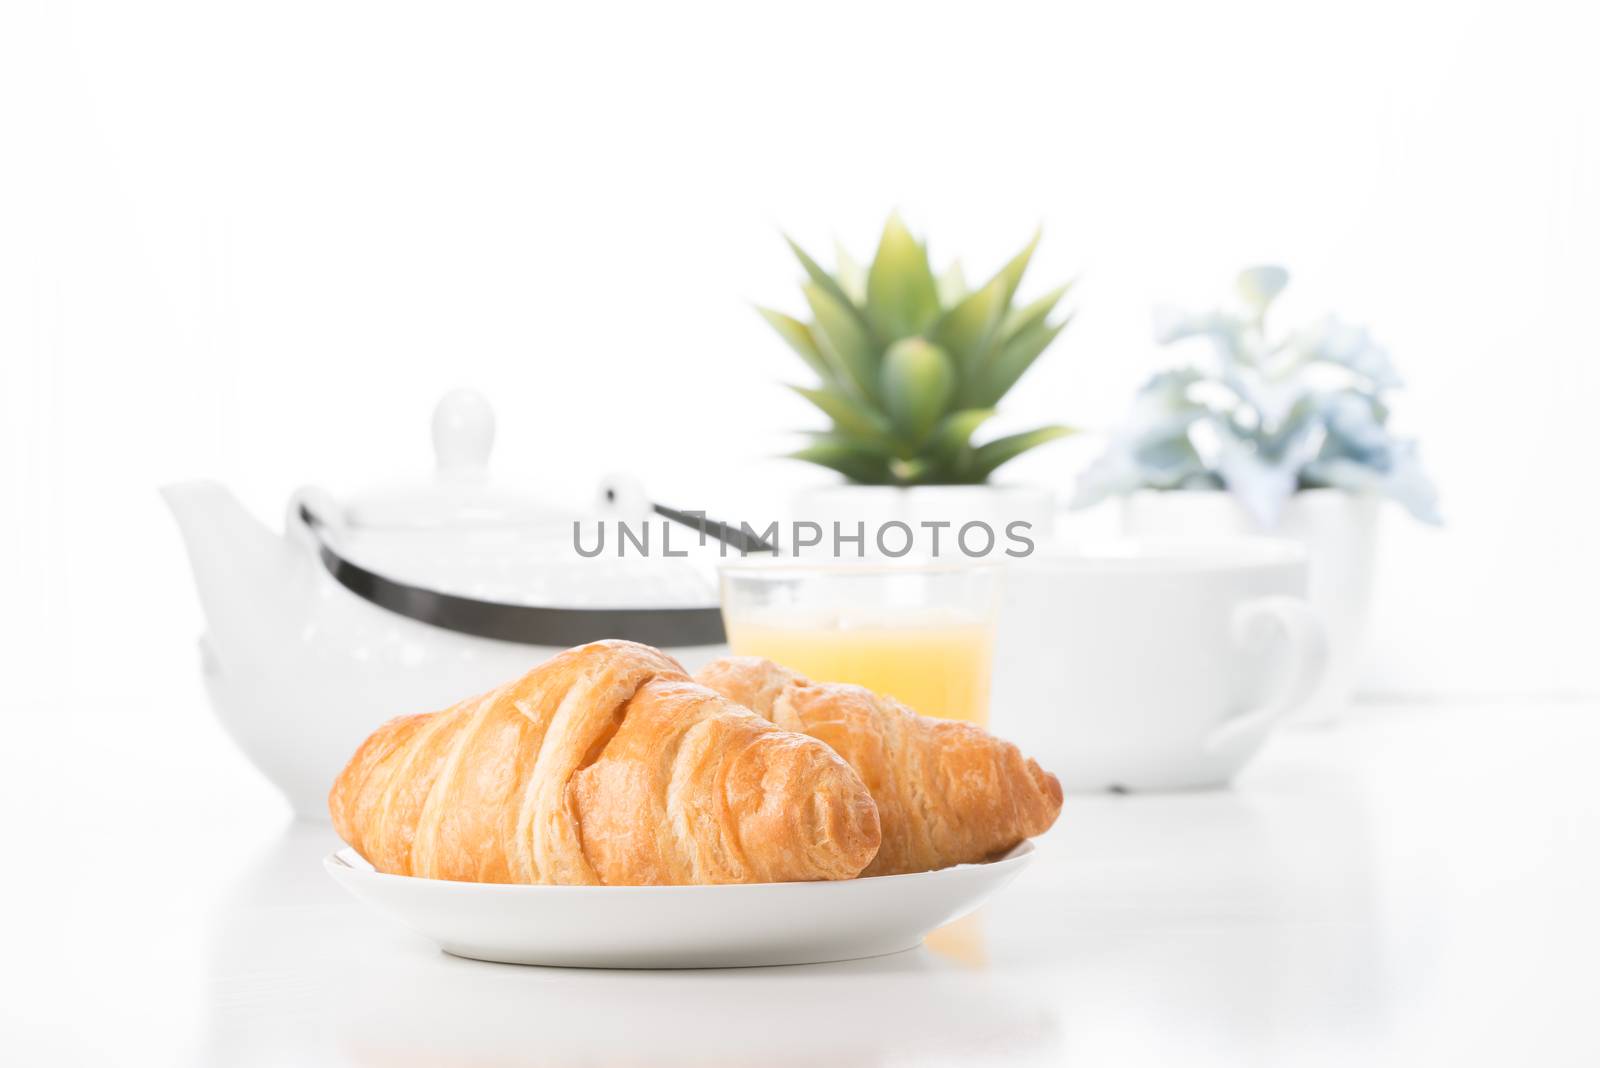 Croissants by billberryphotography